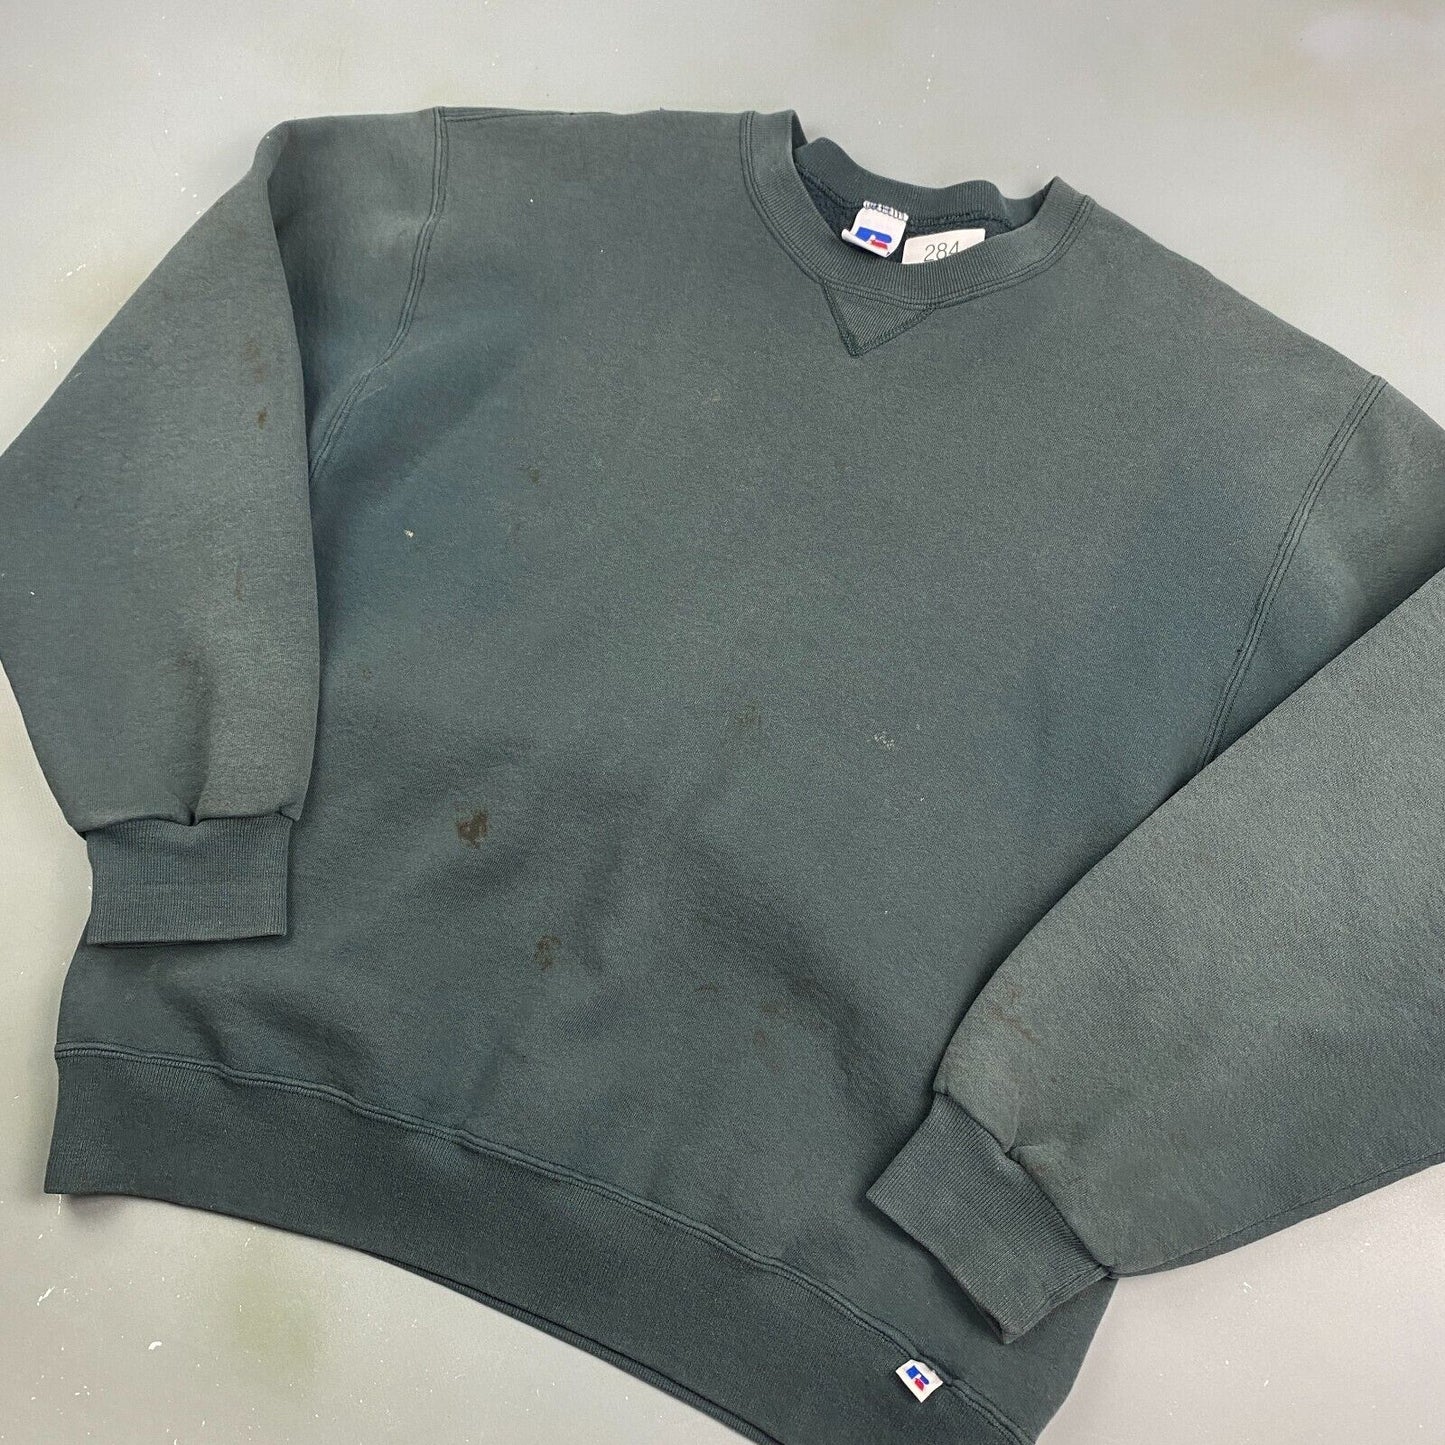 VINTAGE 90s Russell Athletic Blank Faded Green Crewneck Sweater sz Large Men